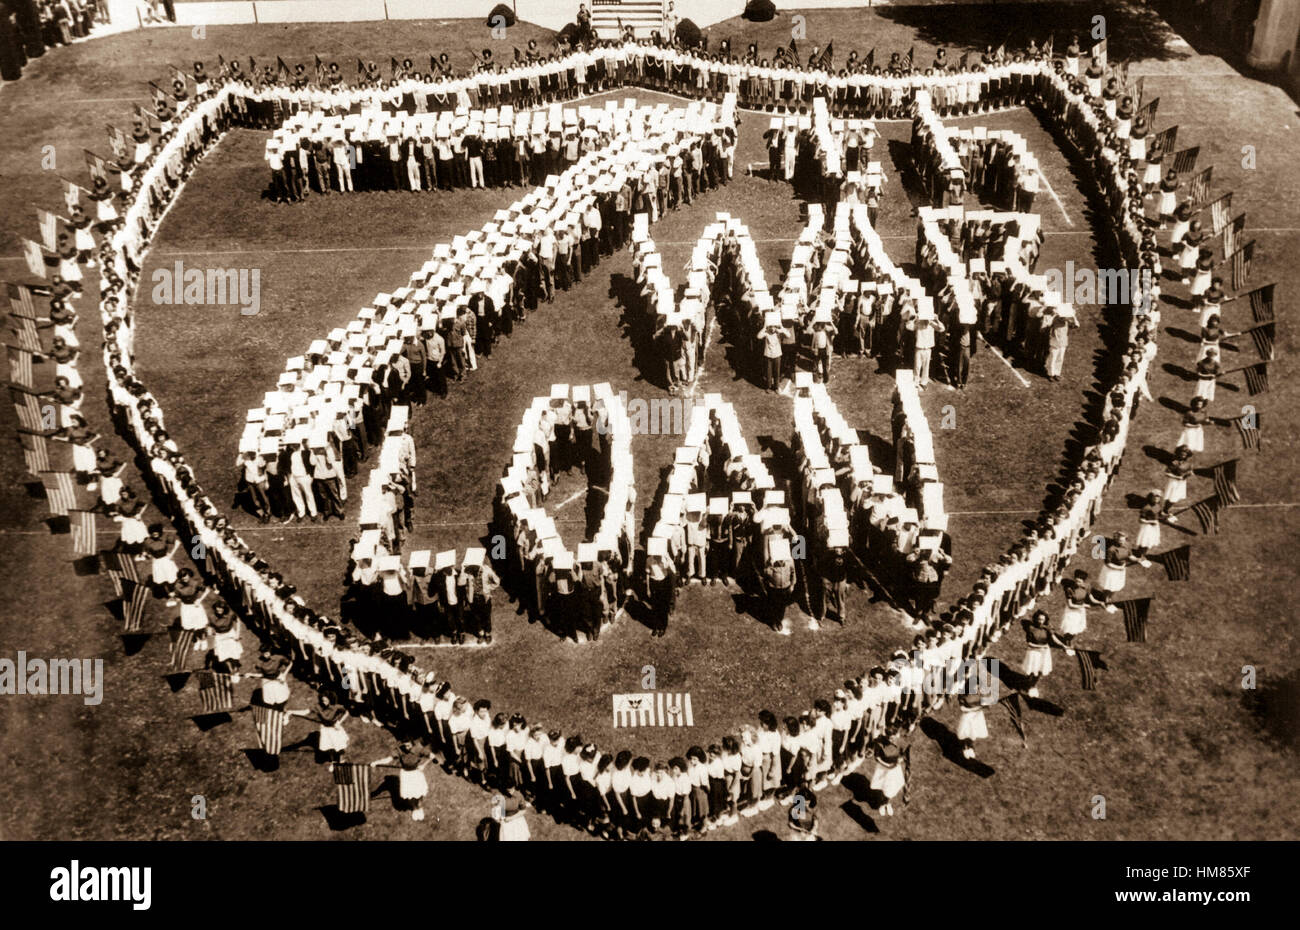 Forming a U.S. Coast Guard shield, high school students at Long Beach, Calif. make a striking appeal for the support of the current 7th War Loan drive, in which every purchase of a war bond helps to land that knockout blow against the Japs.  Ca. 1945. (Coast Guard) Exact Date Shot unknown NARA FILE #:  026-G-4548 WAR & CONFLICT #:  770 Stock Photo